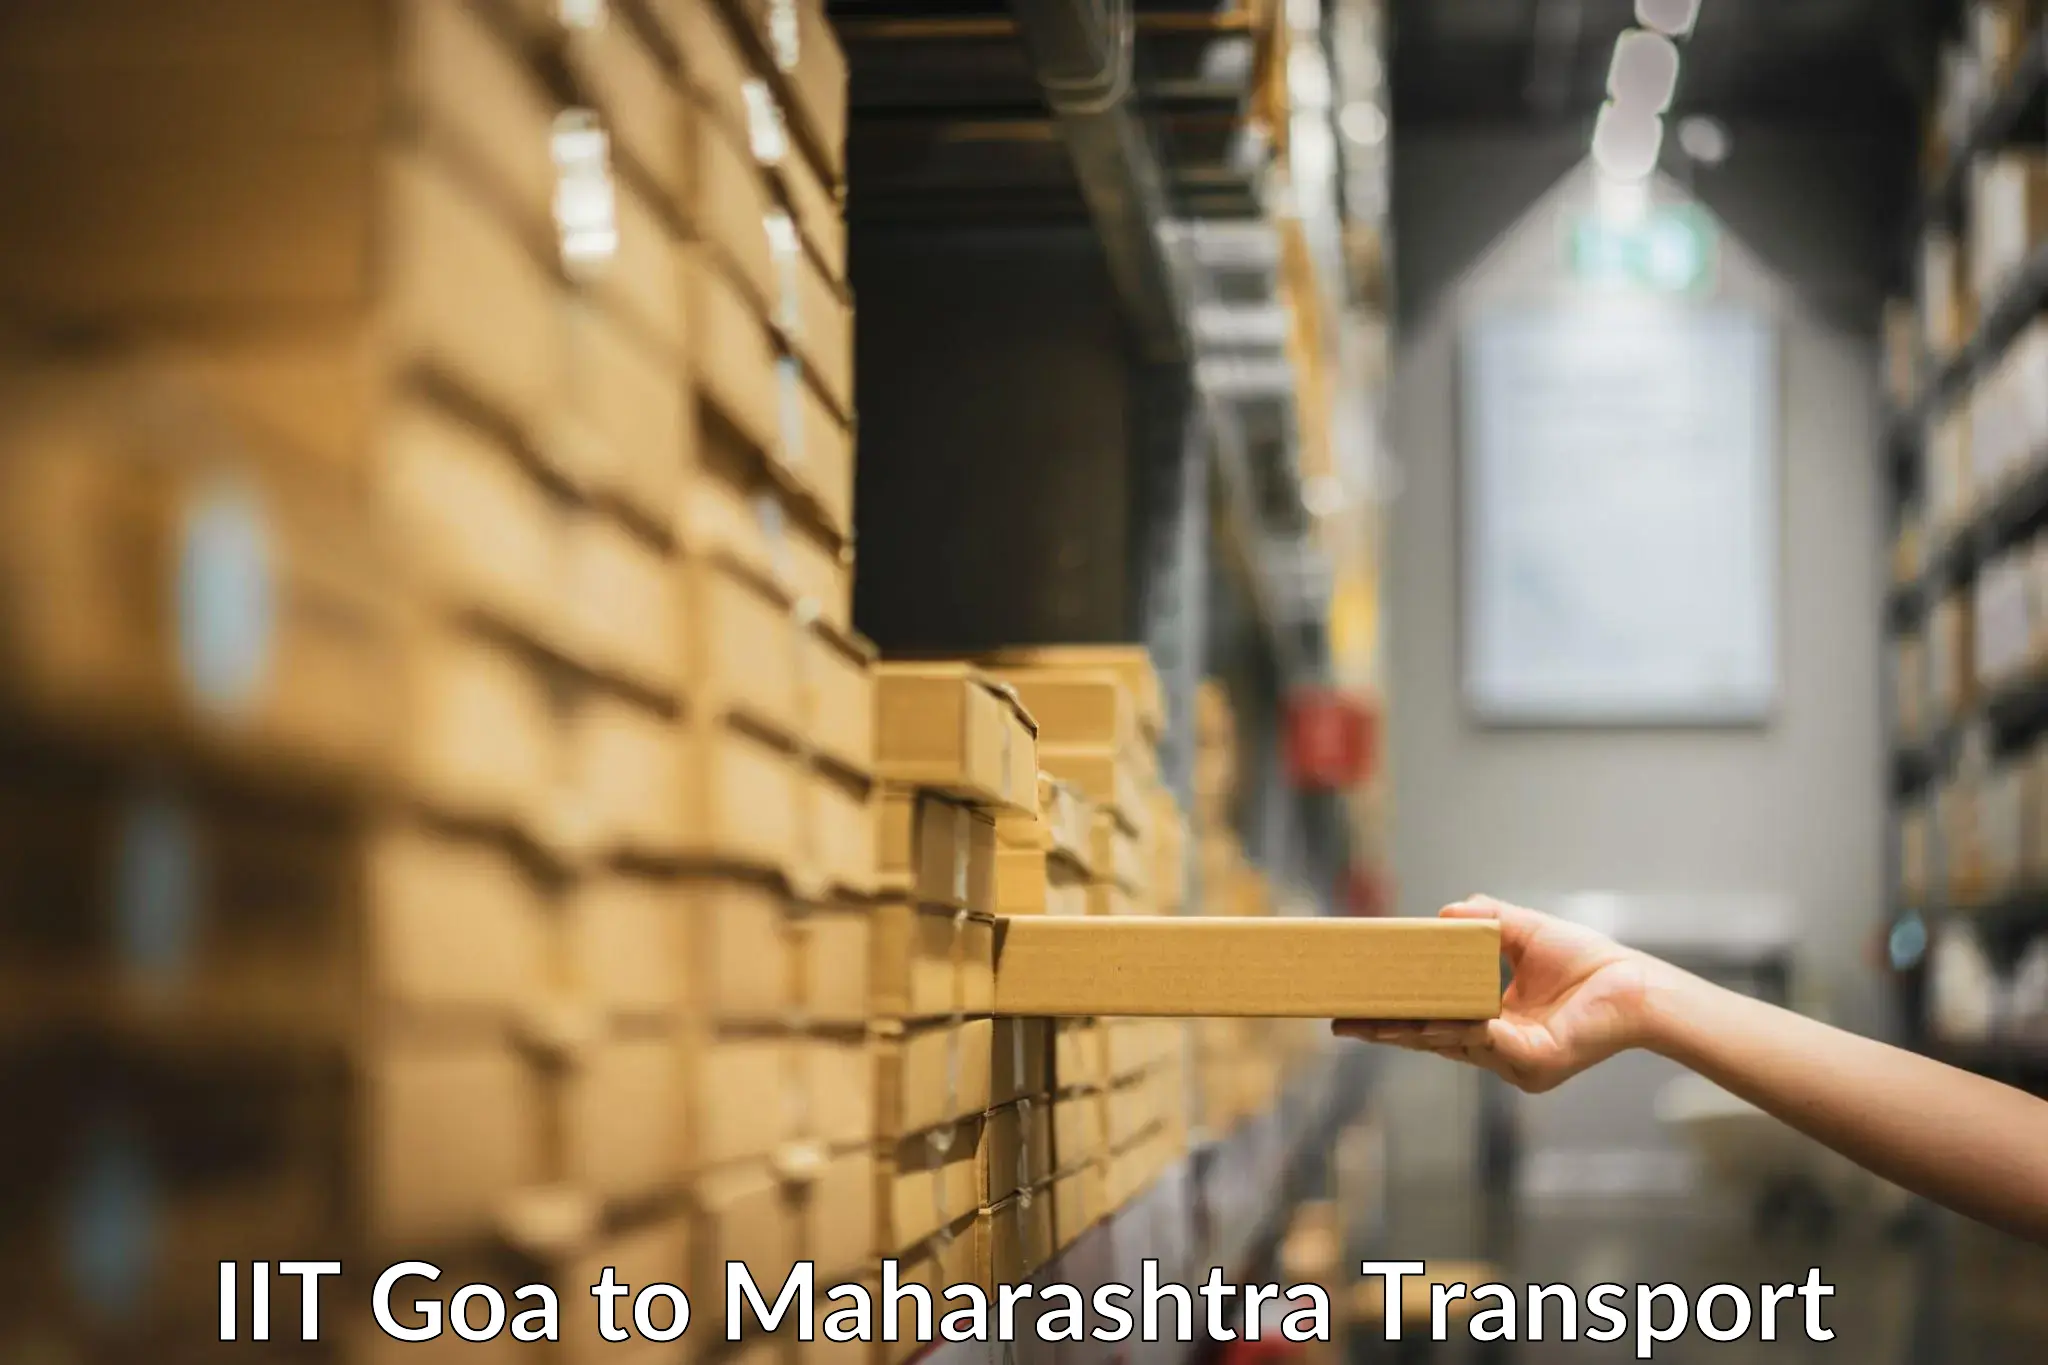 Transport in sharing in IIT Goa to Thane